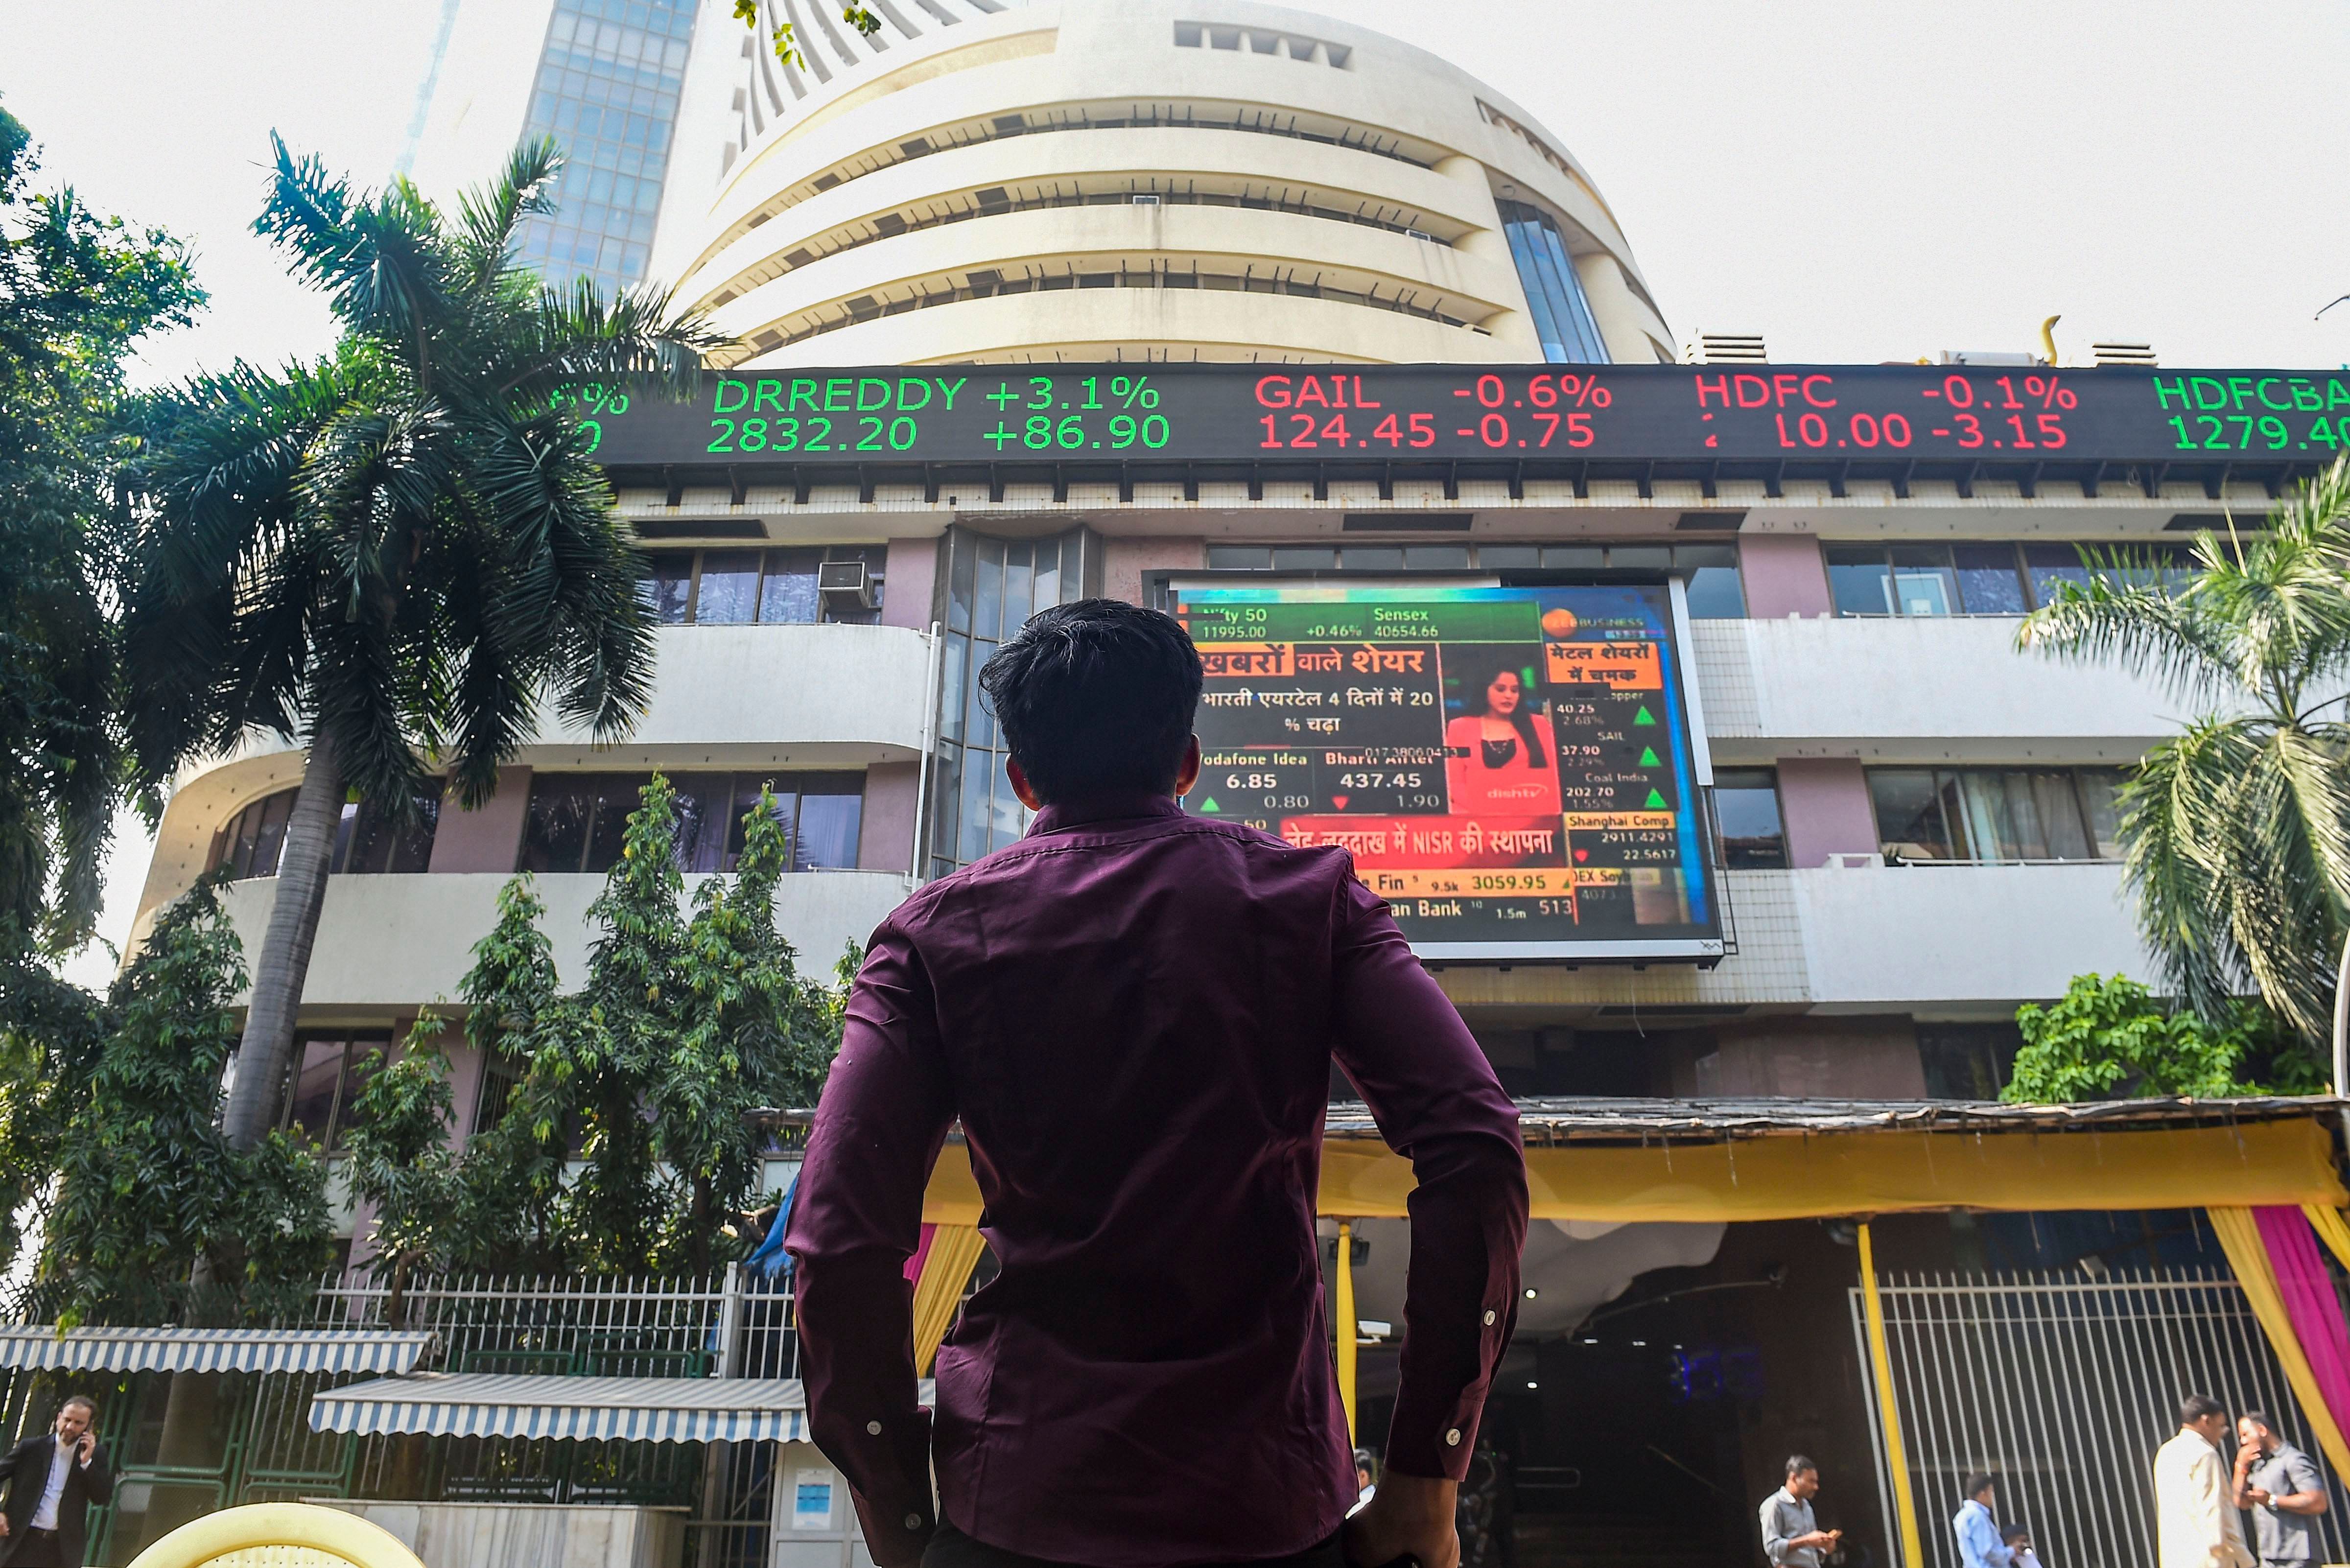 A bystander watches the stock prices displayed on a digital screen at the facade of the Bombay Stock Exchange (BSE) building, in Mumbai. (PTI Photo)